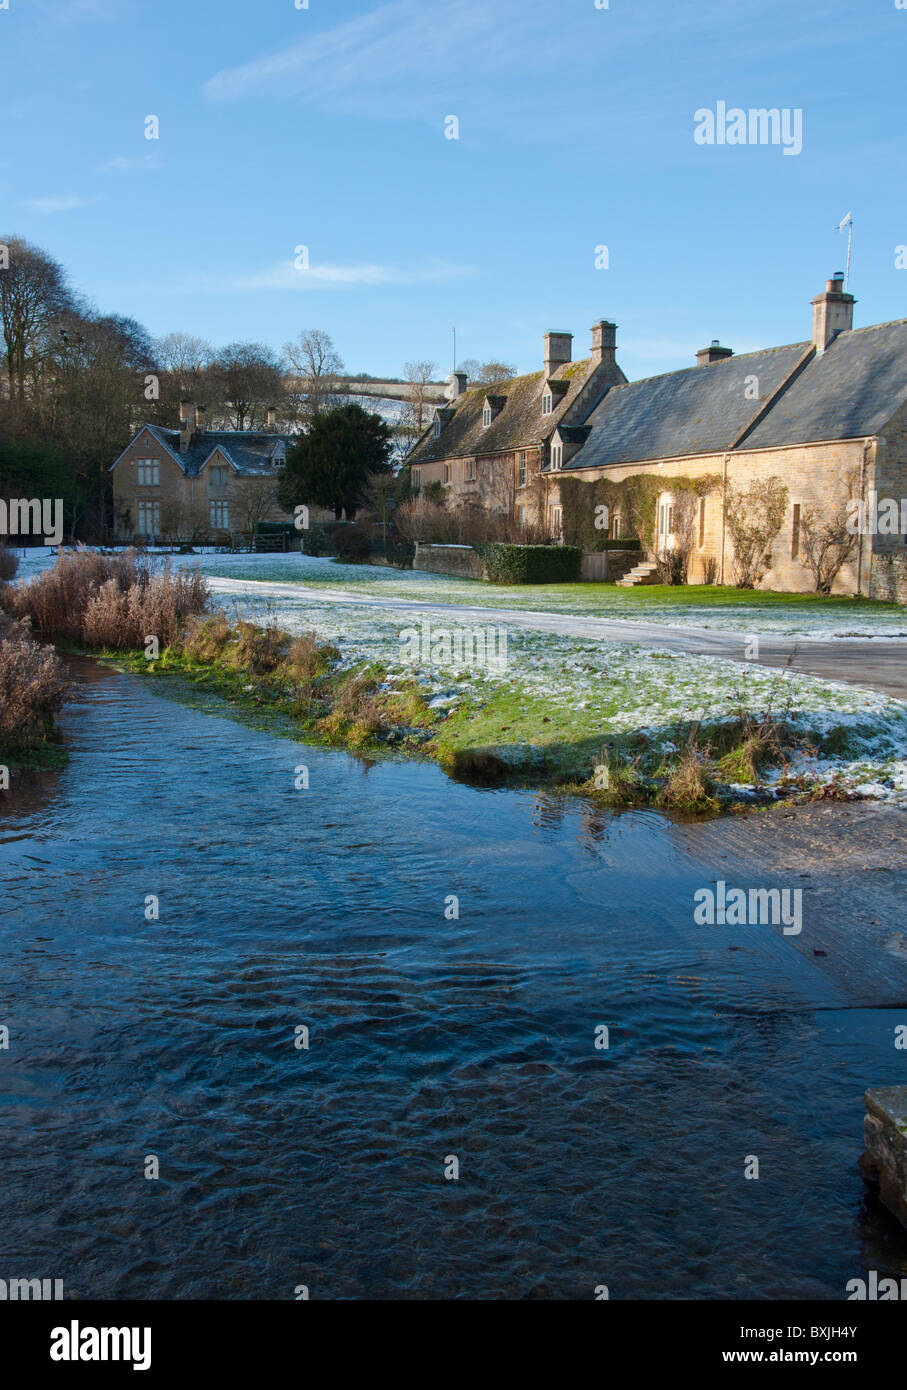 A ford across the river Eye in the picturesque Cotswold village of Upper Slaughter, Gloucestershire, England. Stock Photo